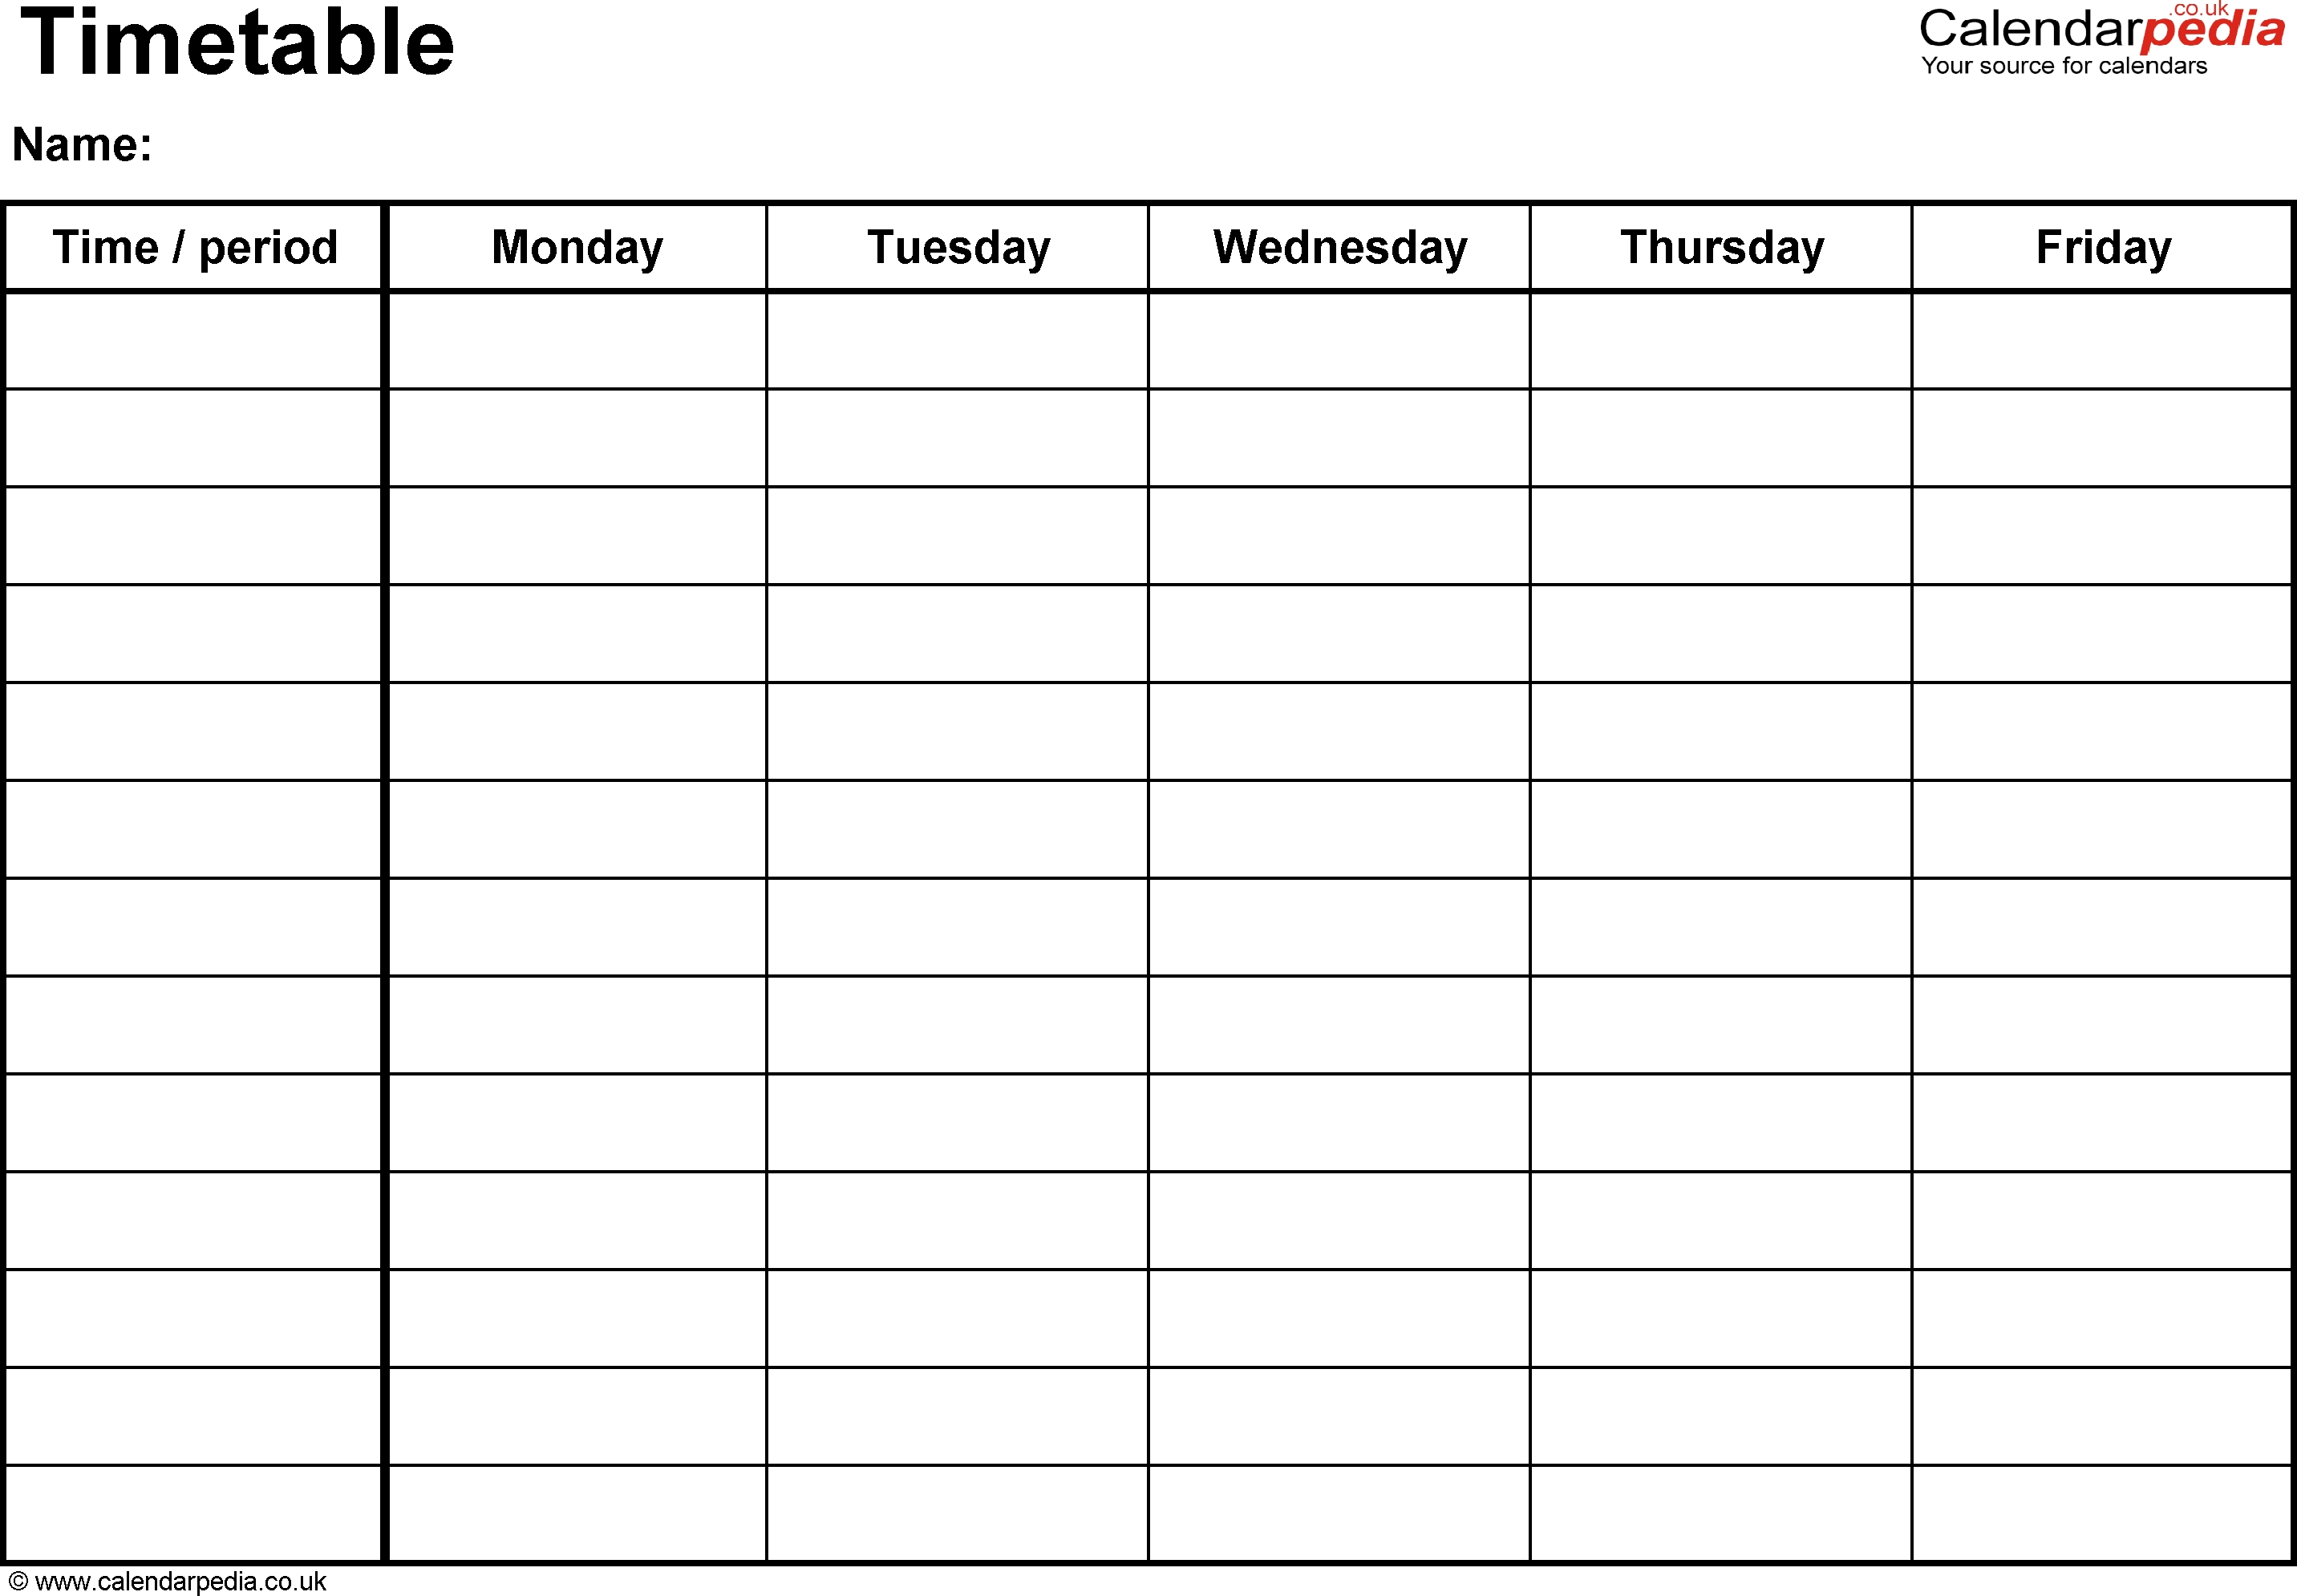 Excel Timetable Template 1: Landscape Format, A4, 1 Page-Monday - Friday Timetable Template